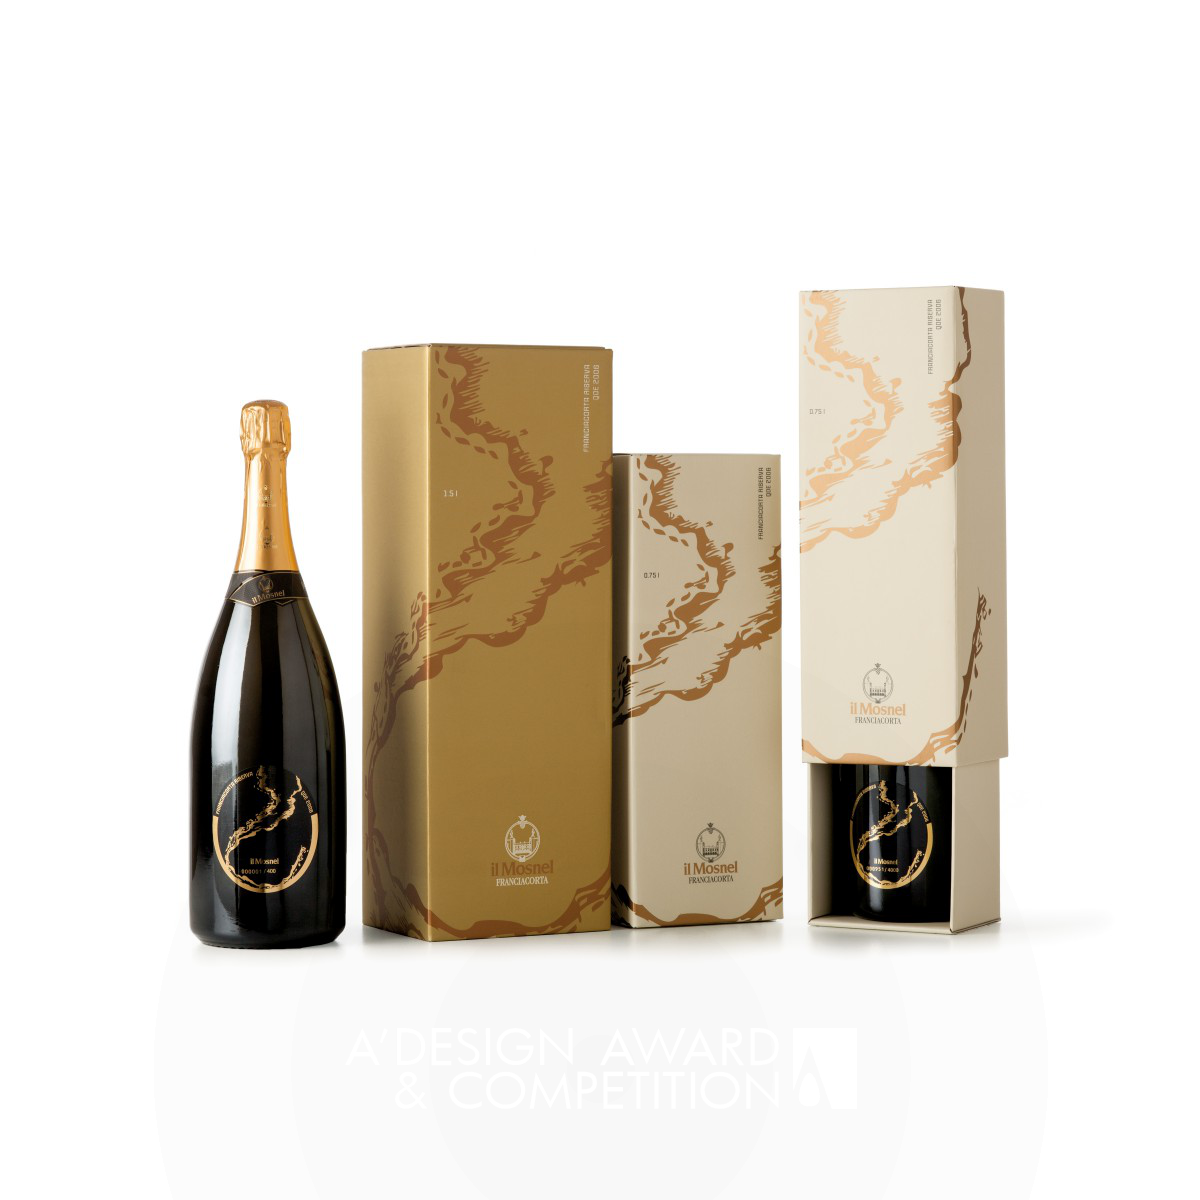 Il Mosnel QdE 2012 <b>Sparkling Wine Label and Pack